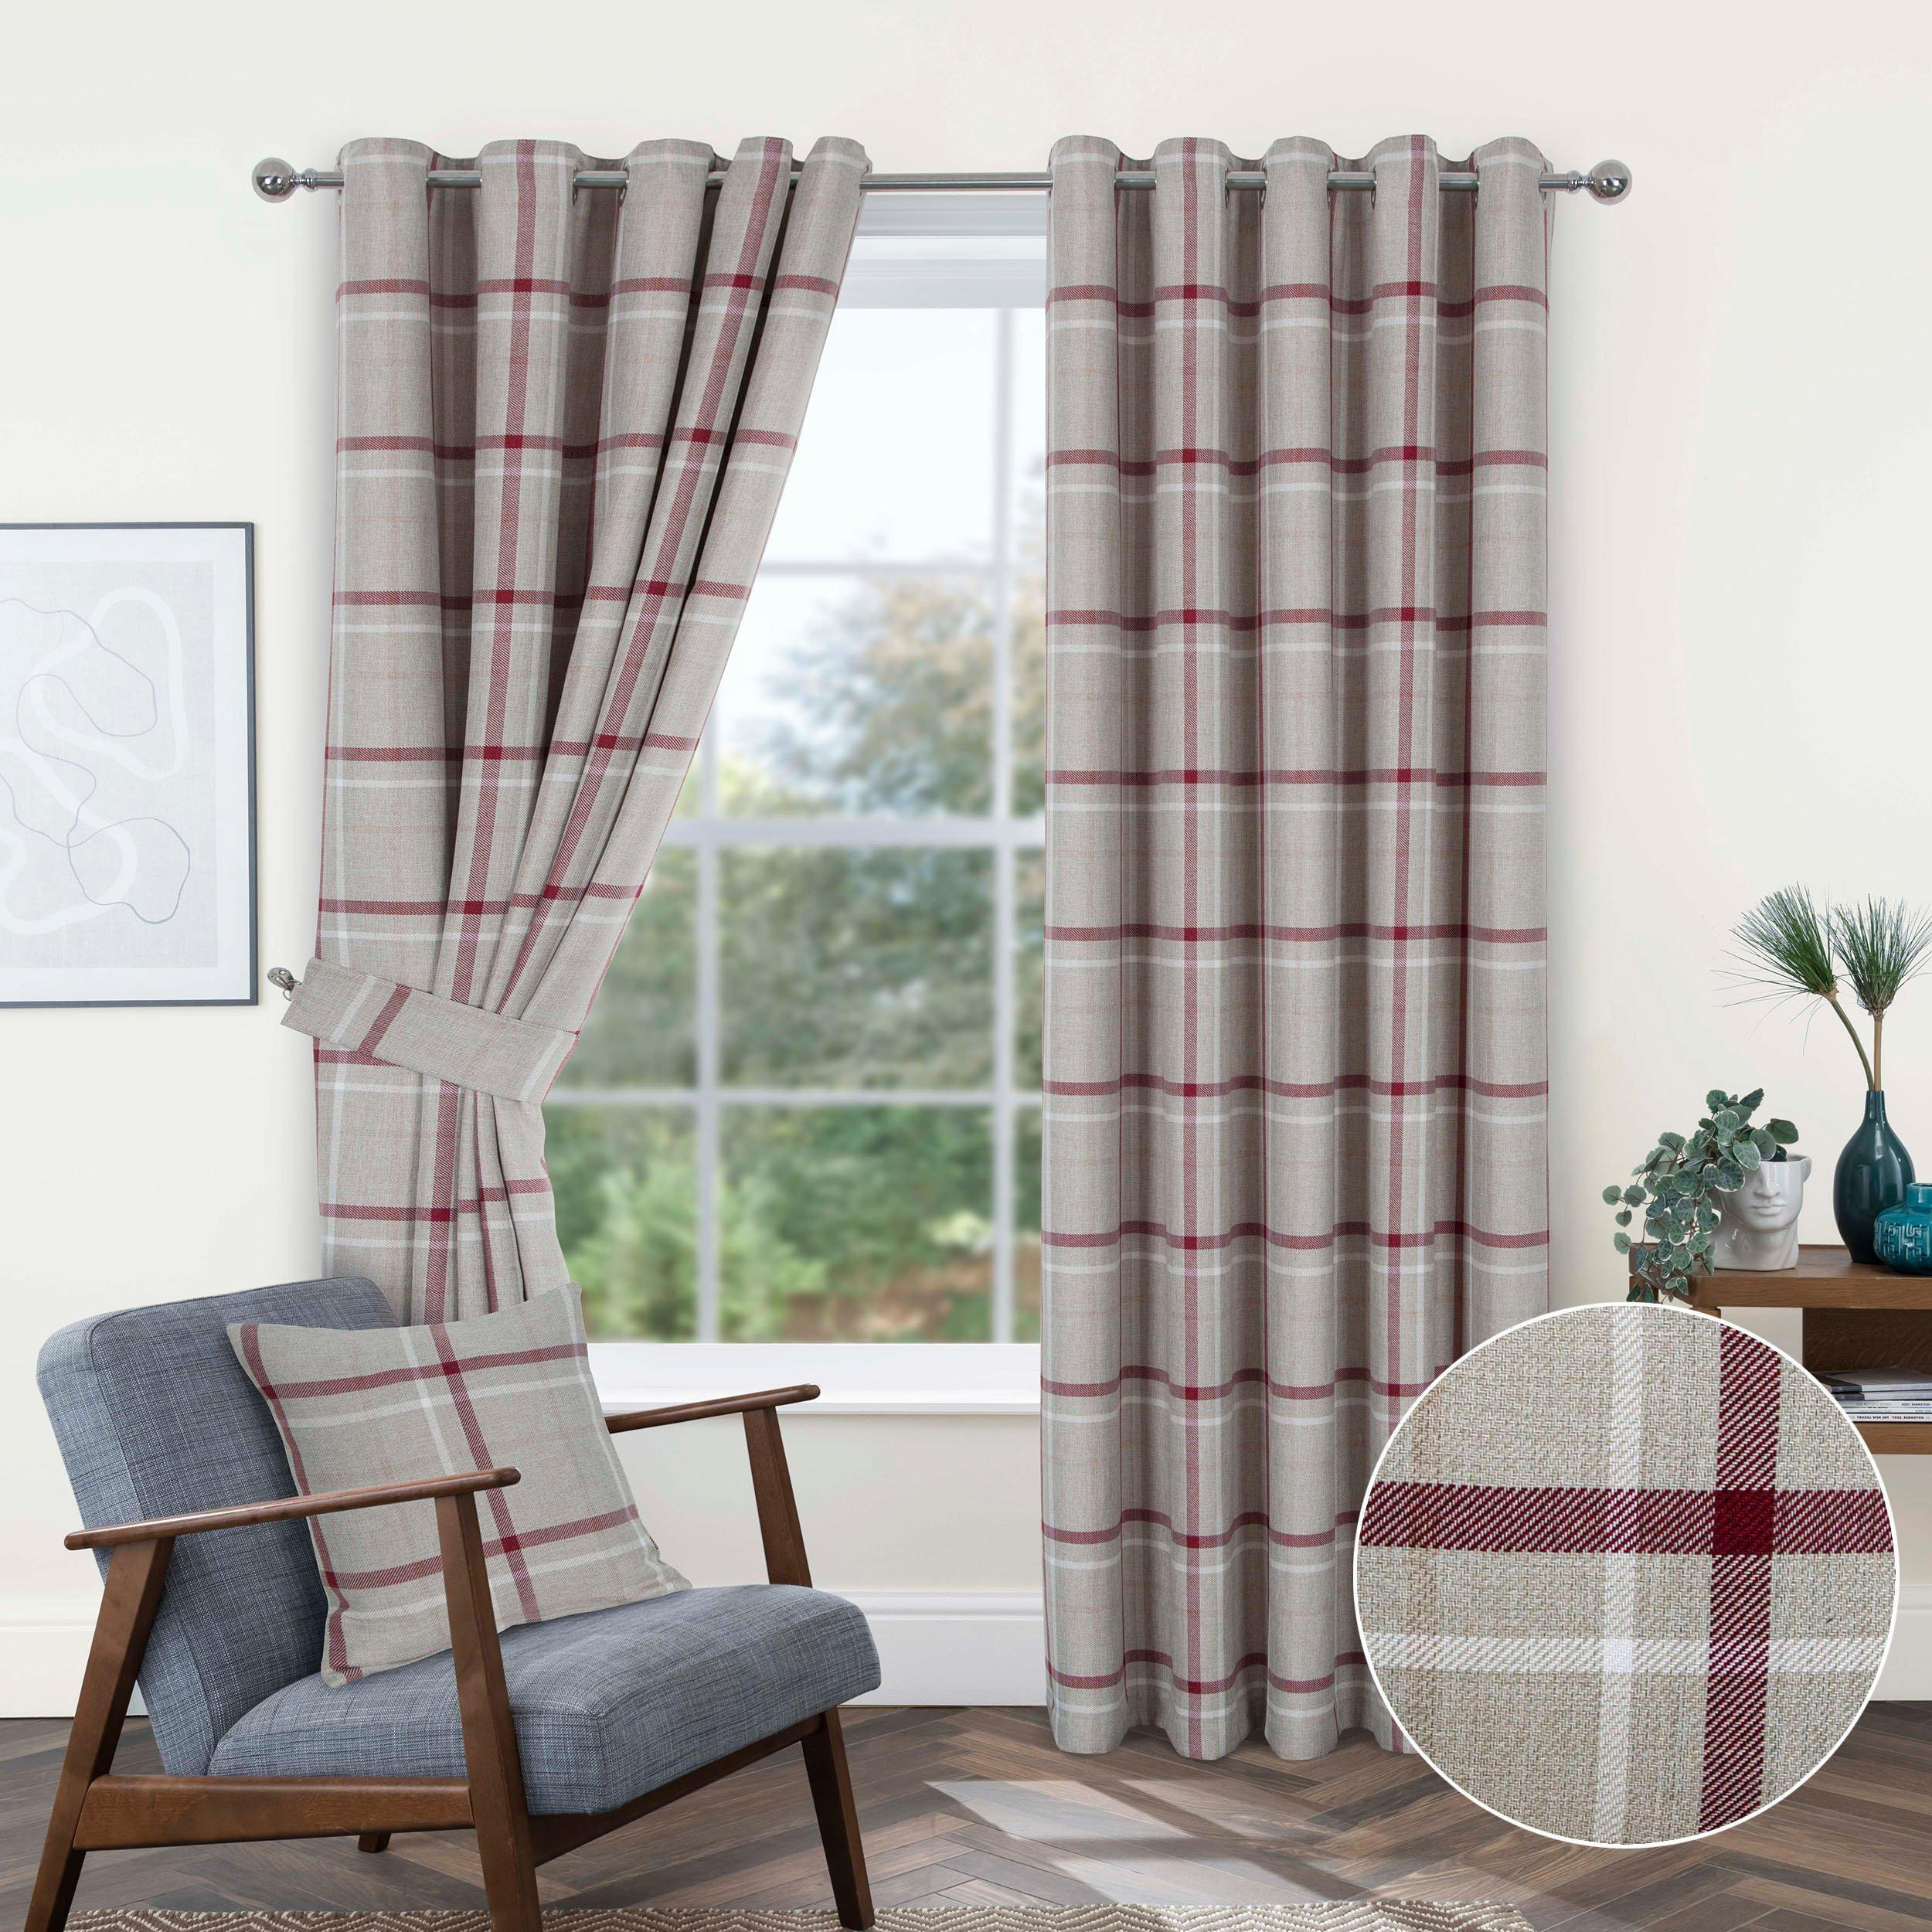 Hudson Woven Check Fully Lined Eyelet Curtains pair - image 1